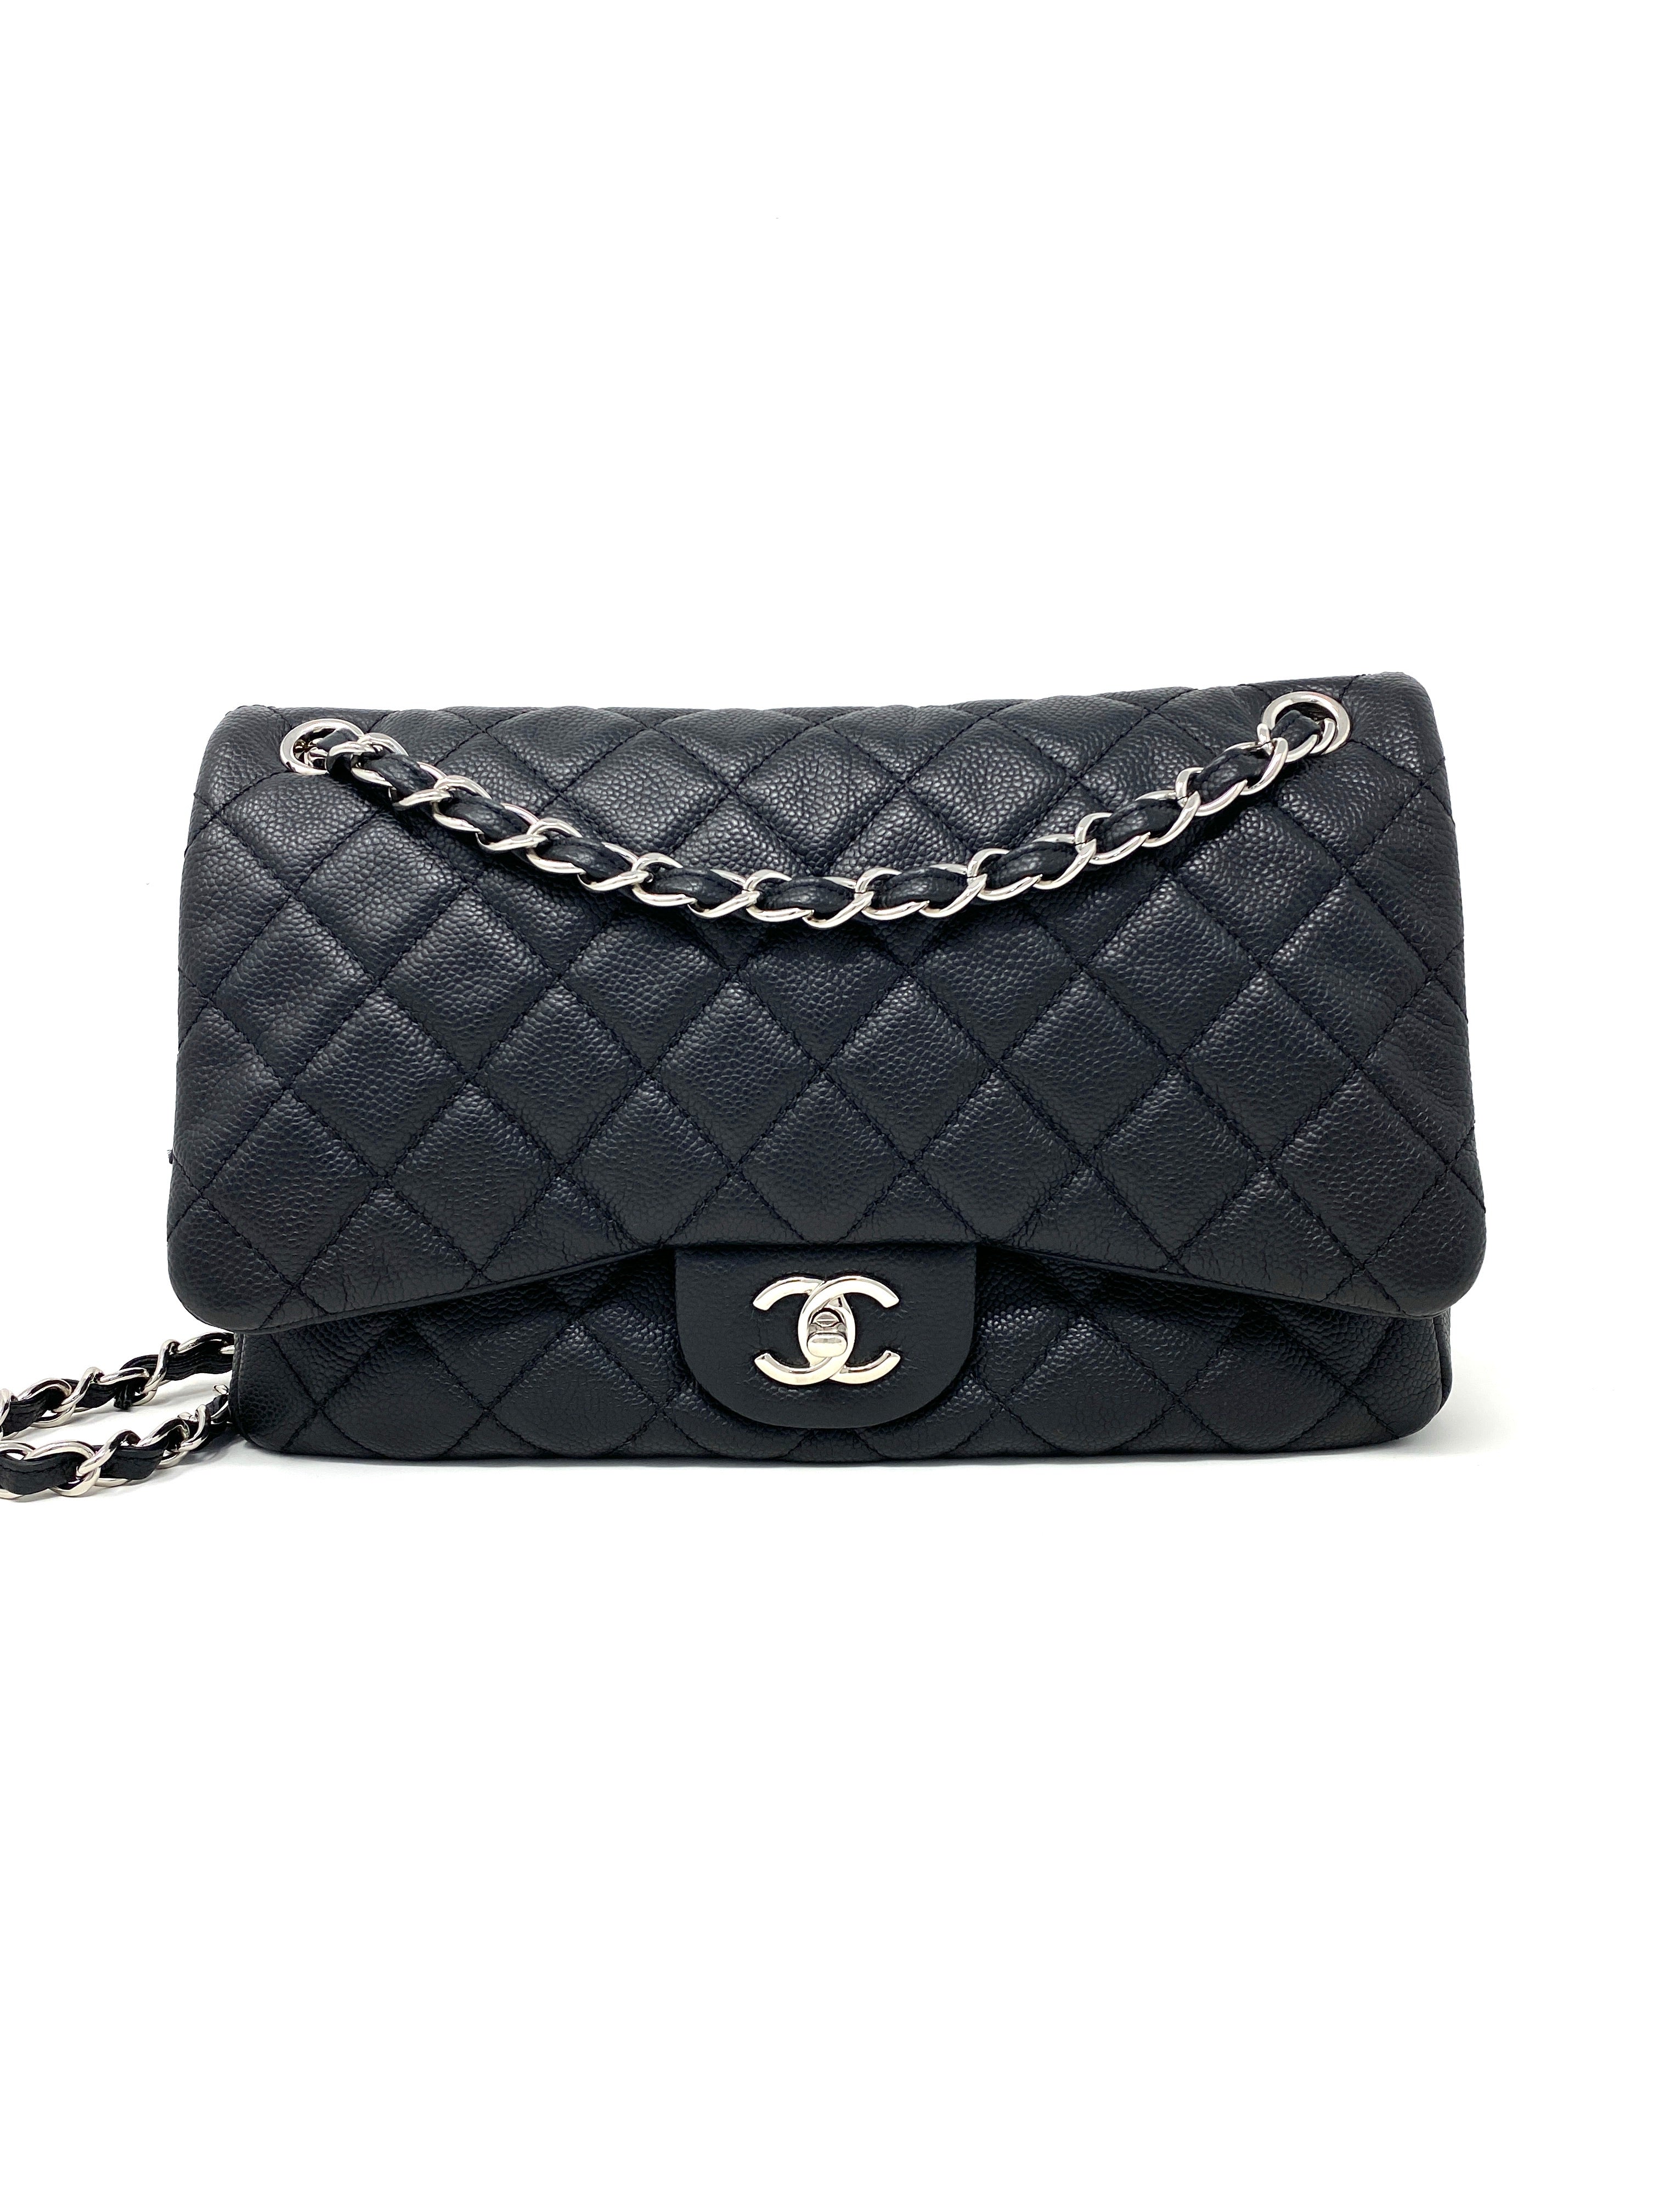 Chanel Running Chain Around Flap Bag Quilted Crumpled Calfskin Large